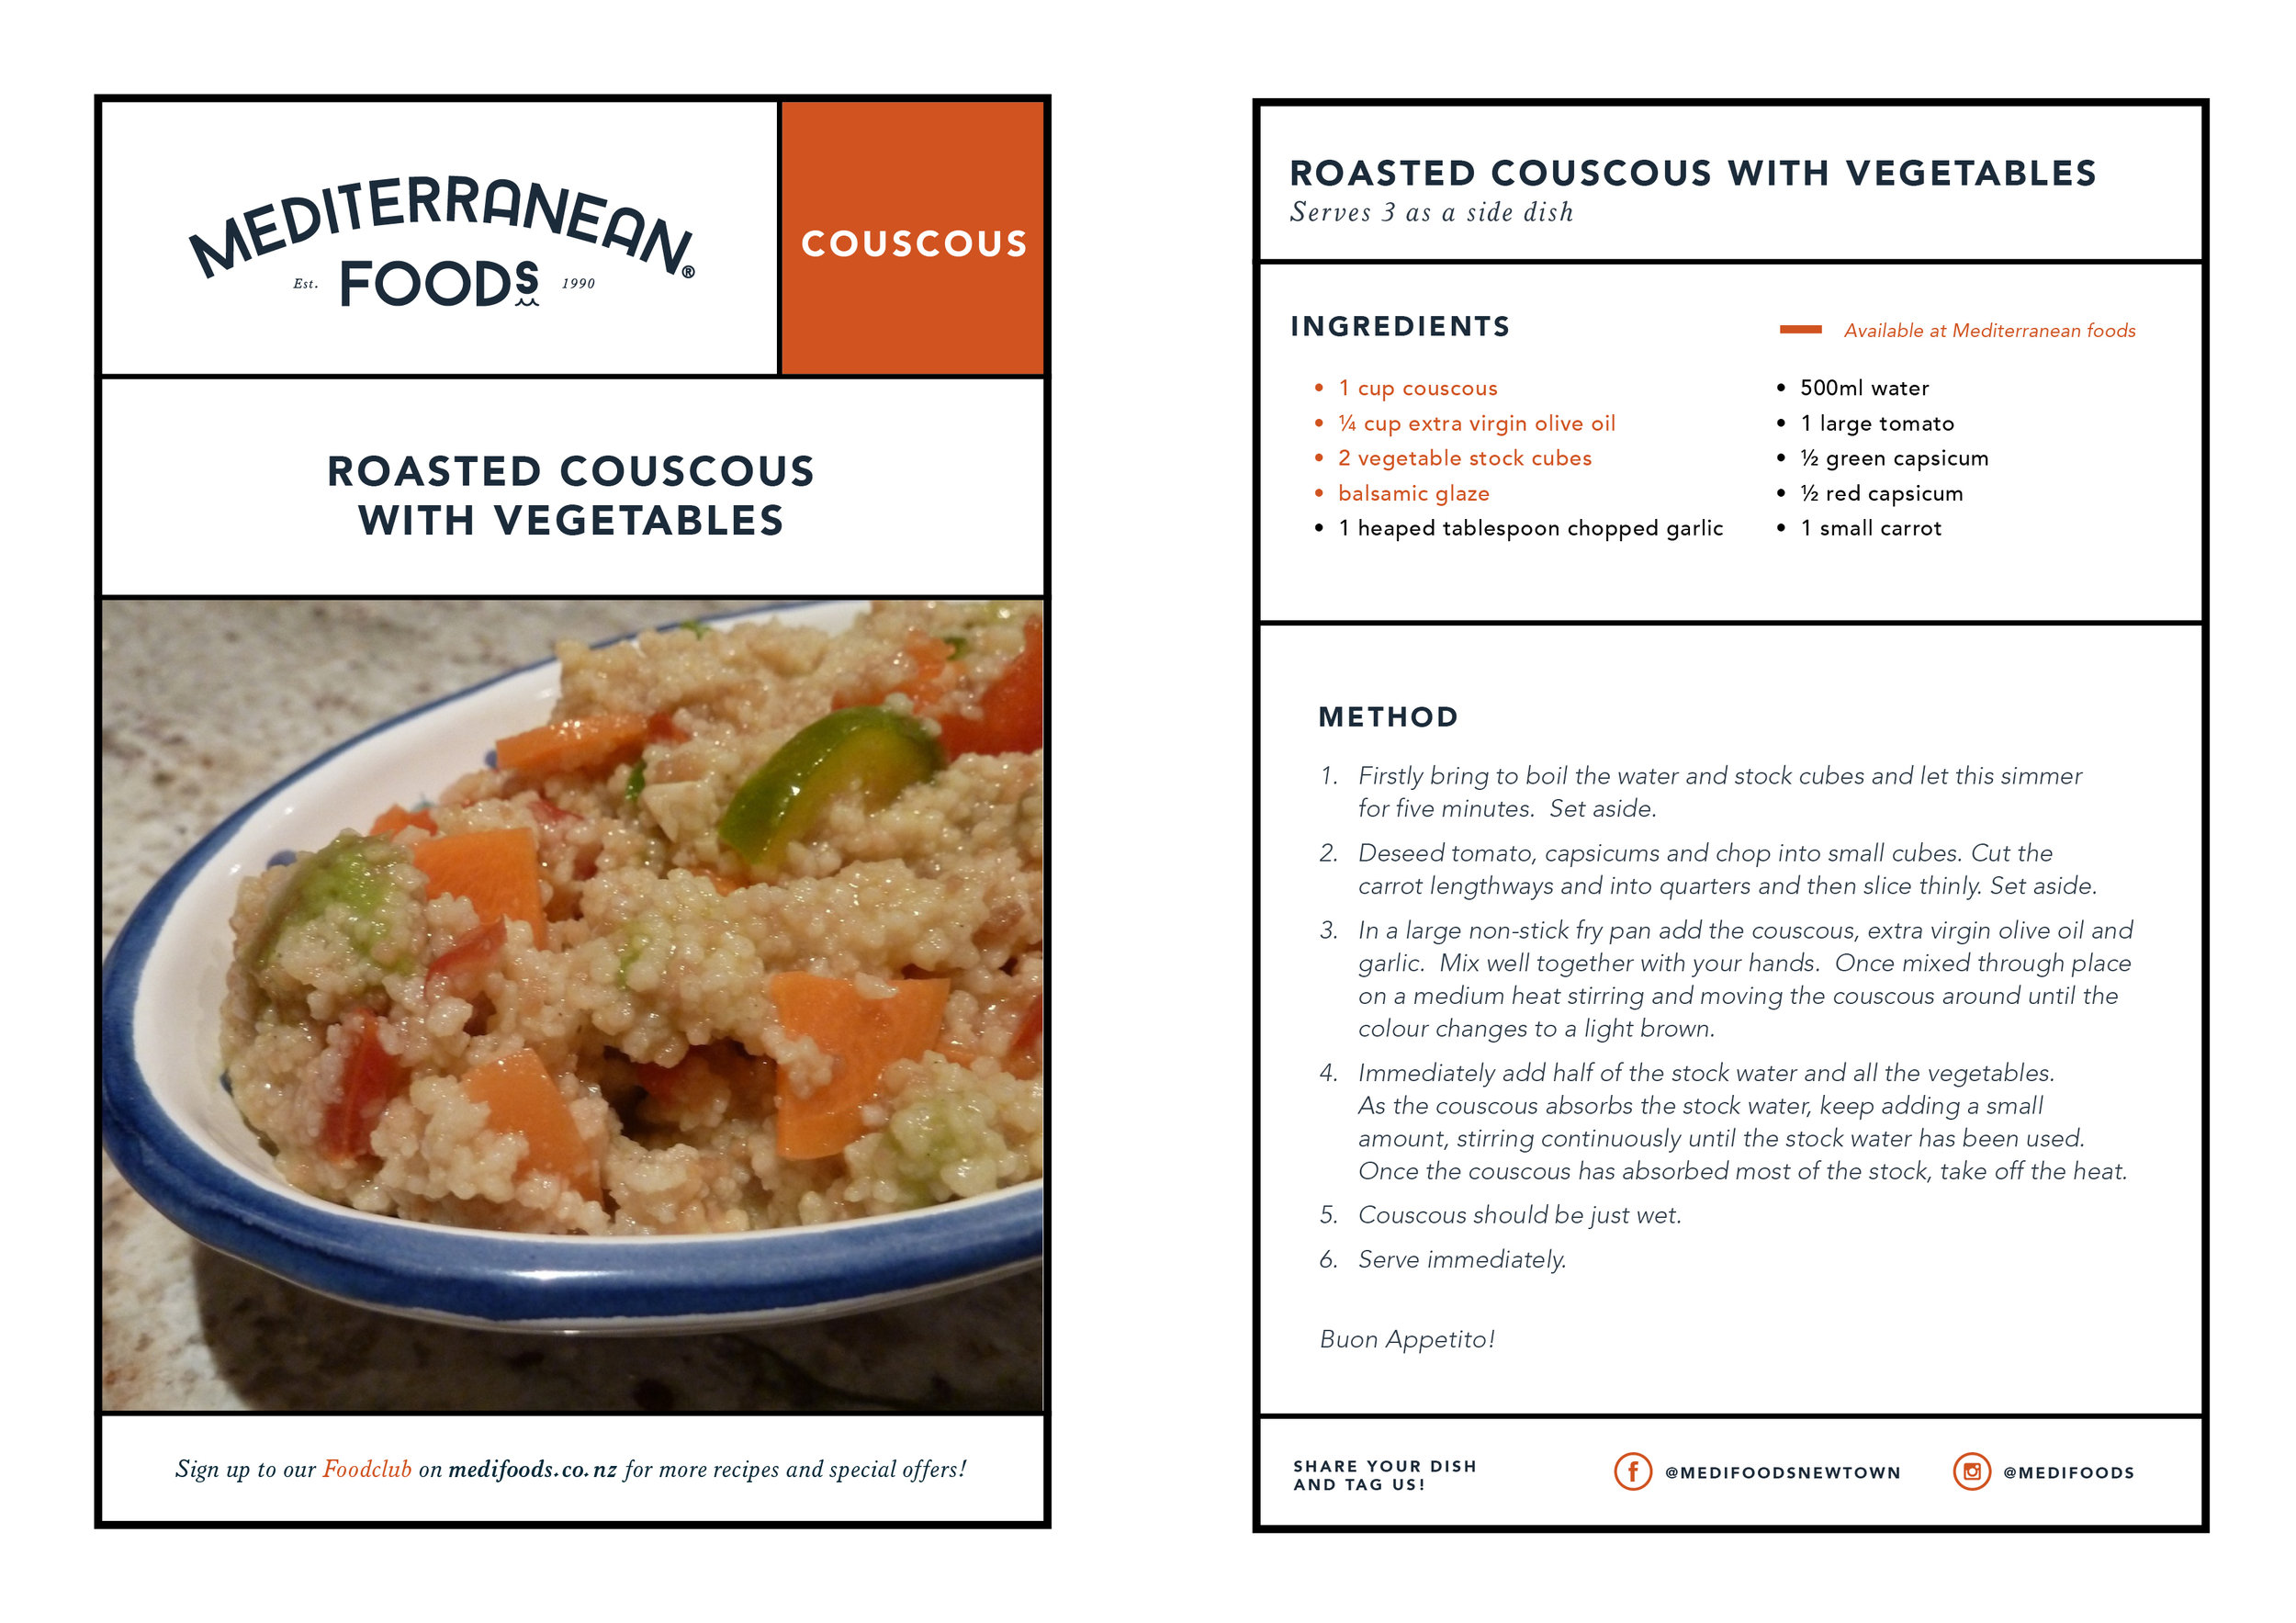 Roasted couscous with vegetables.jpg